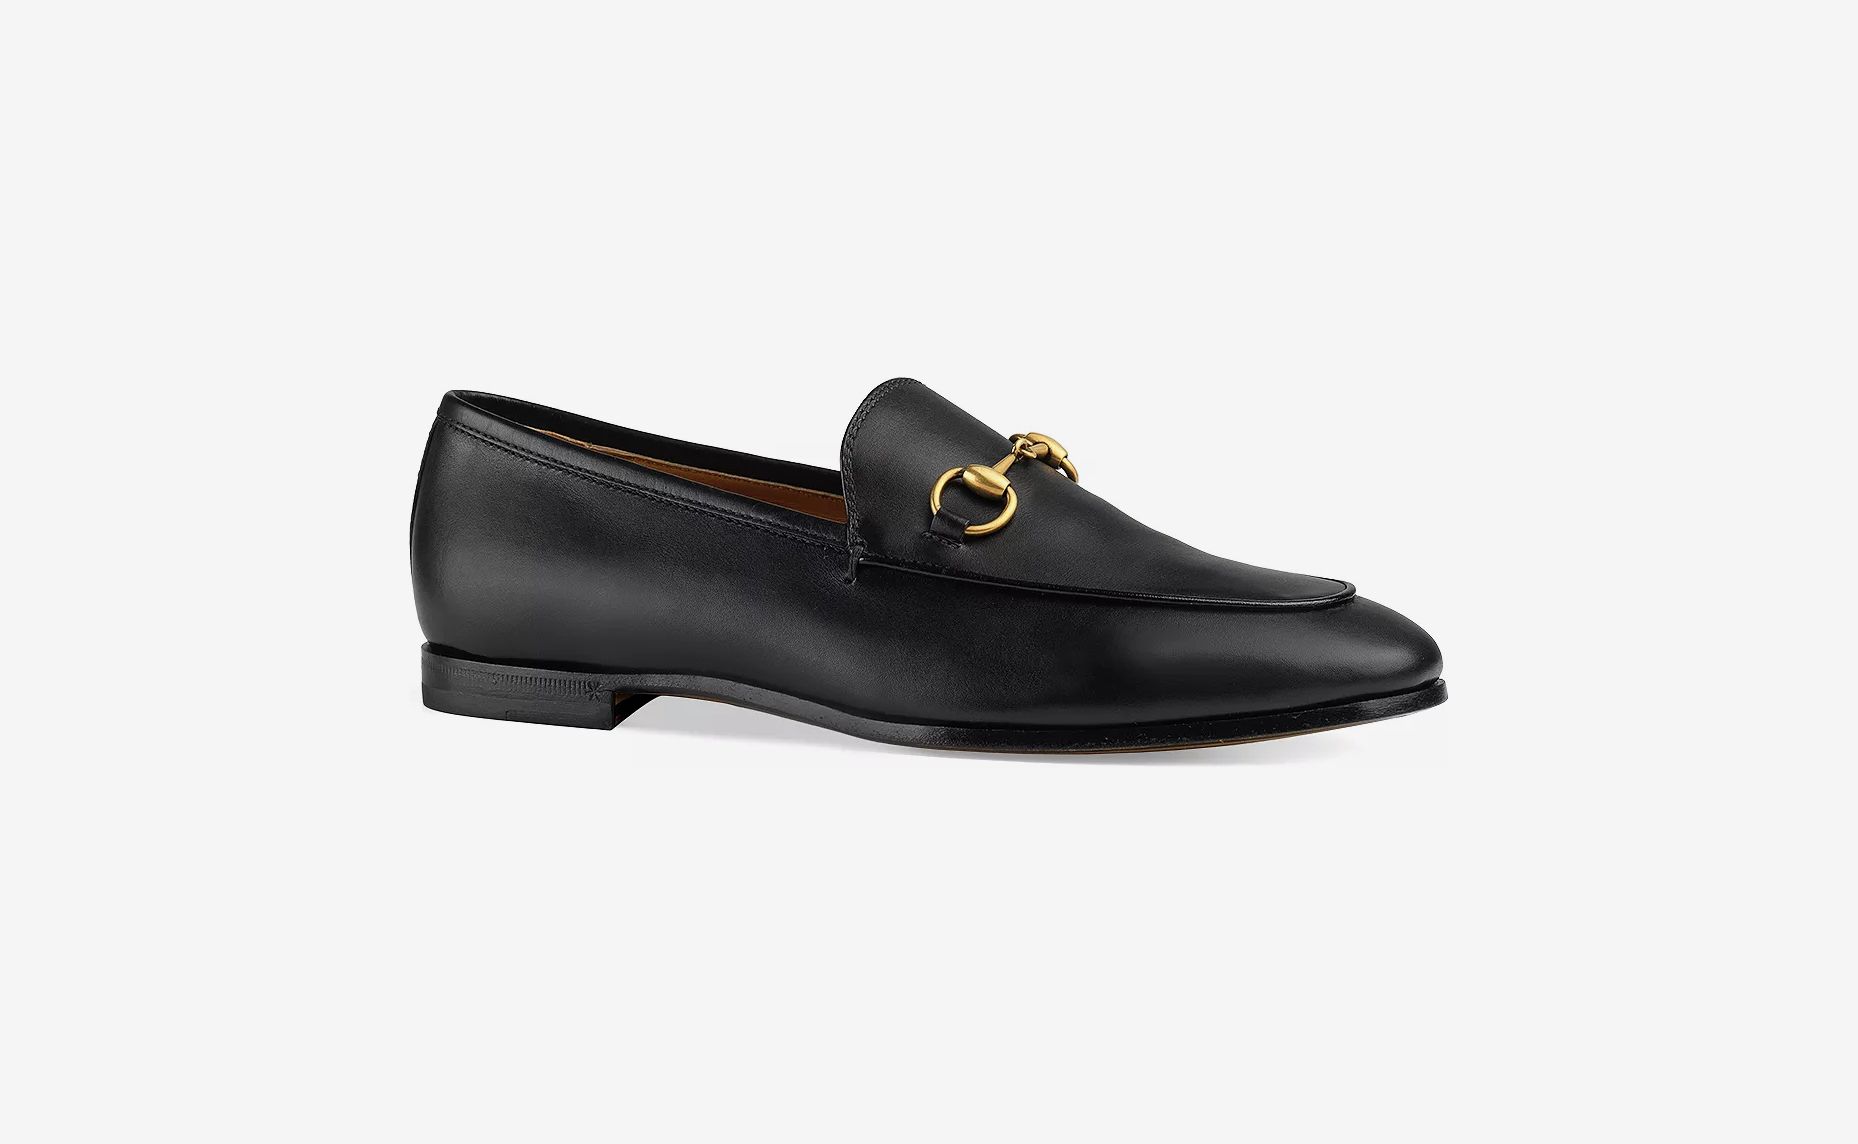 12 Loafers for Women | The Strategist